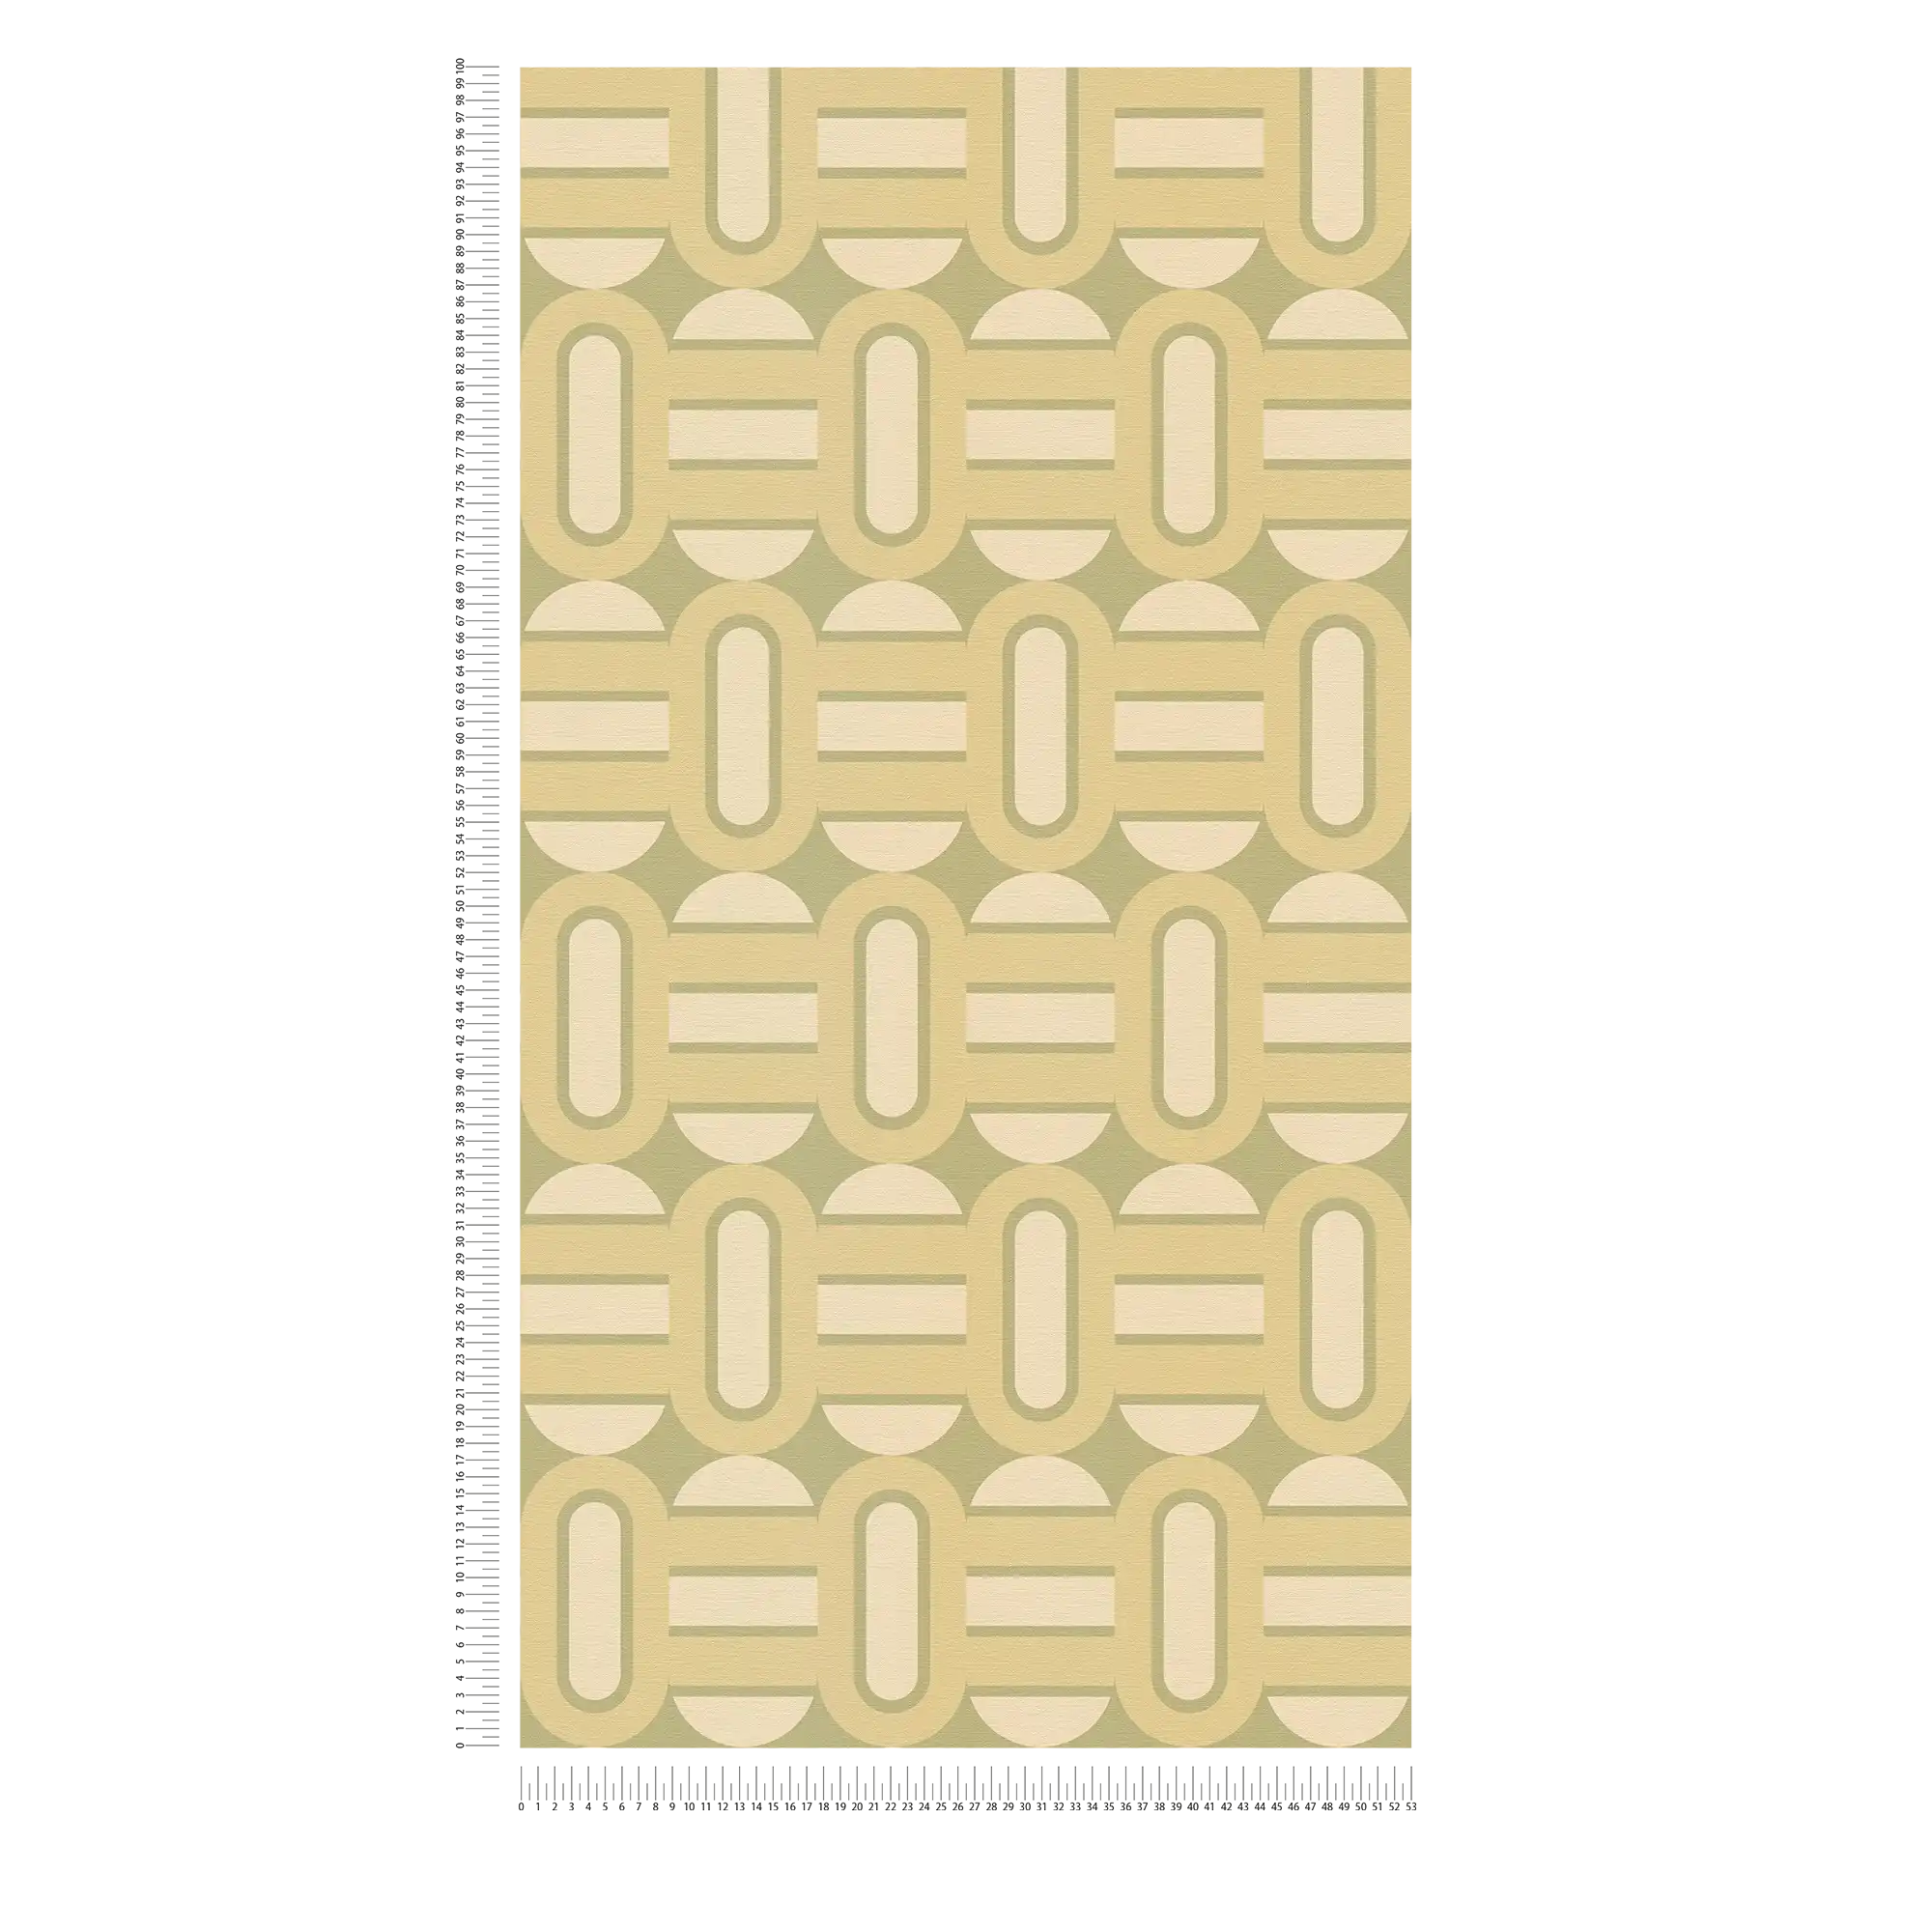             Non-woven wallpaper in retro style patterned with ovals and bars - green, cream
        